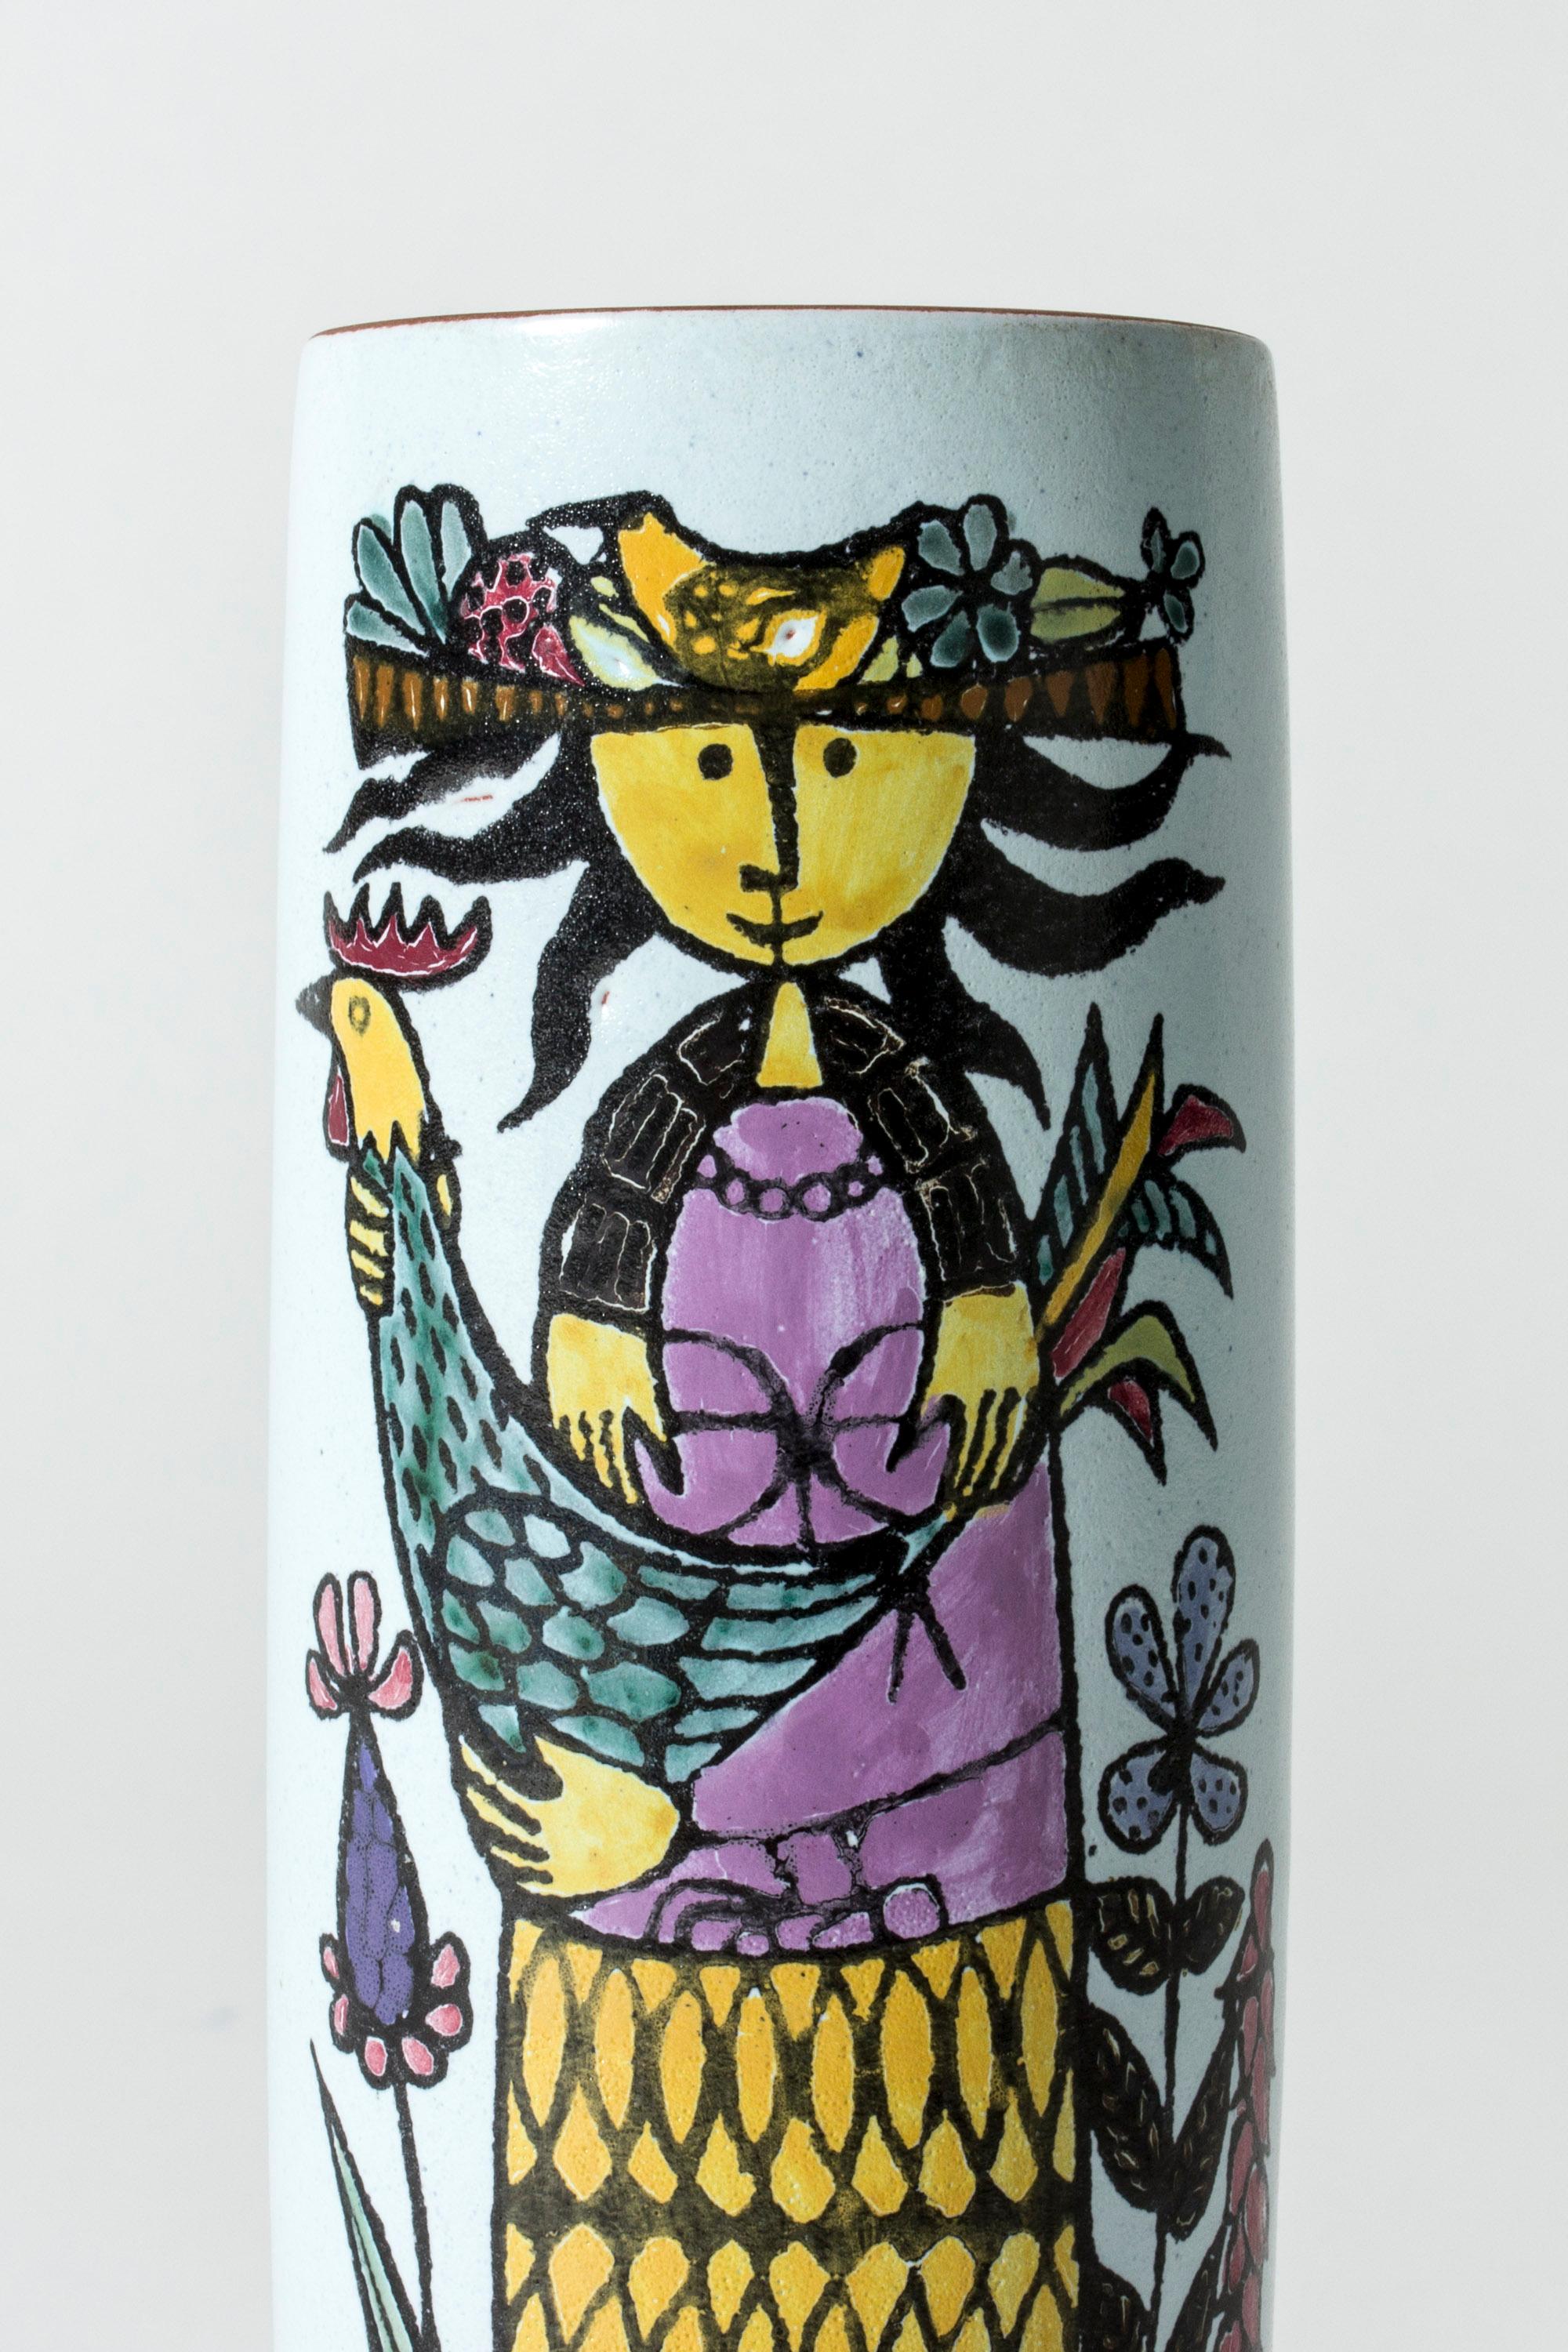 Faience “Karneval” vase by Stig Lindberg, in a clean cylinder shape. Beautiful, playful motif of a woman with a rooster in her arms on one side, and a bird on the other. The rim is unglazed, giving an organic touch to the smooth design.

The